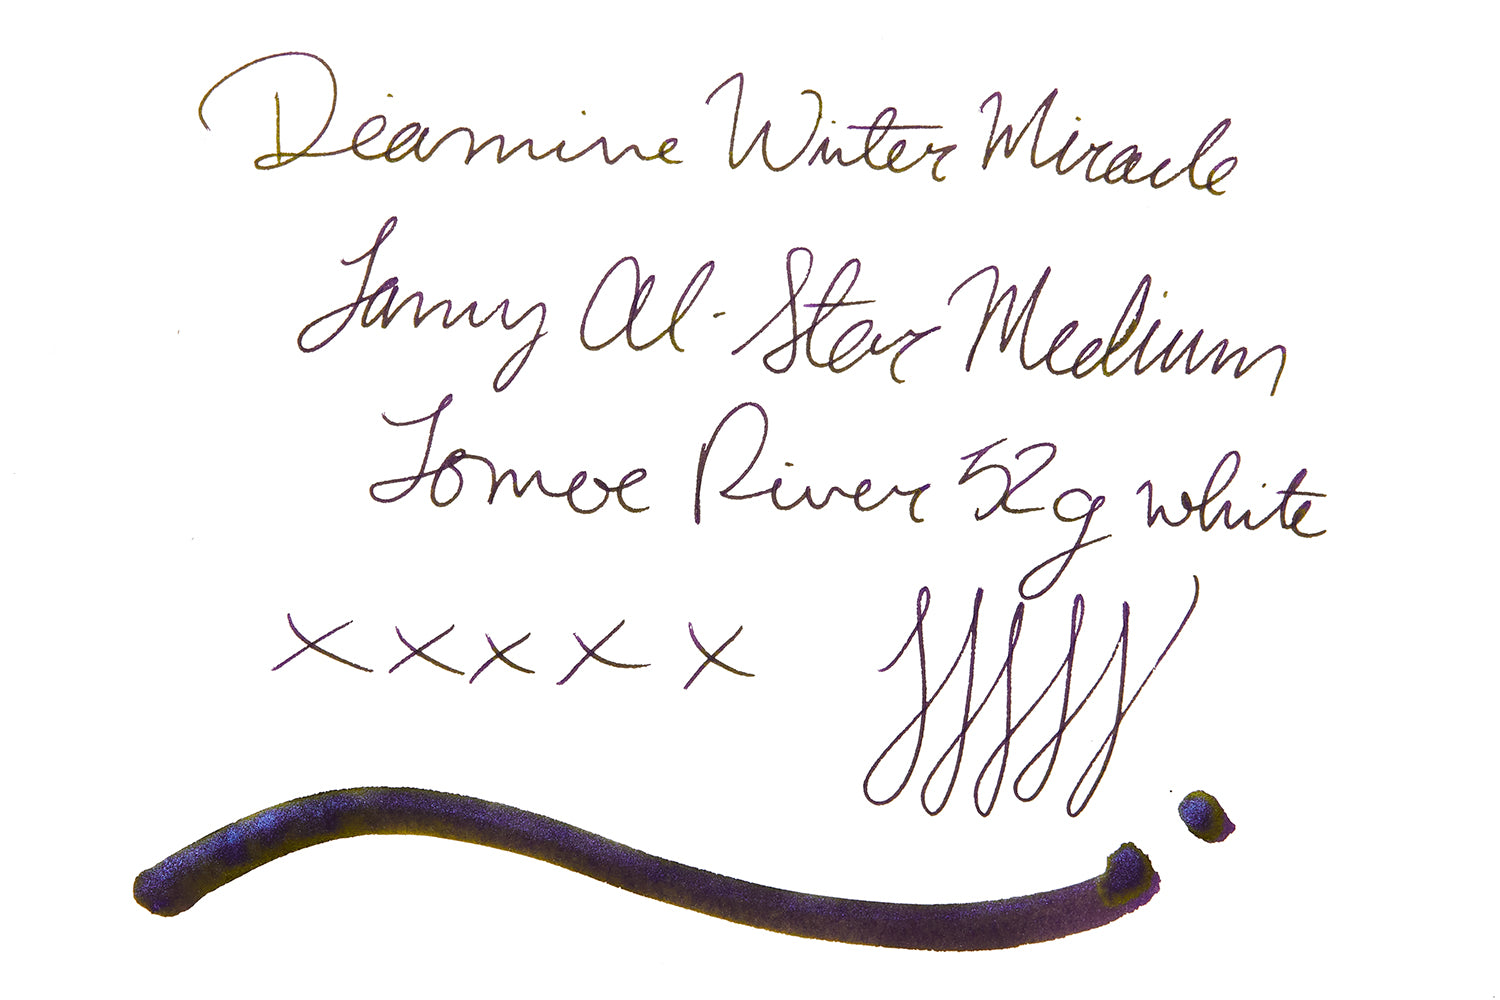 Diamine Winter Miracle ink review on Tomoe River paper